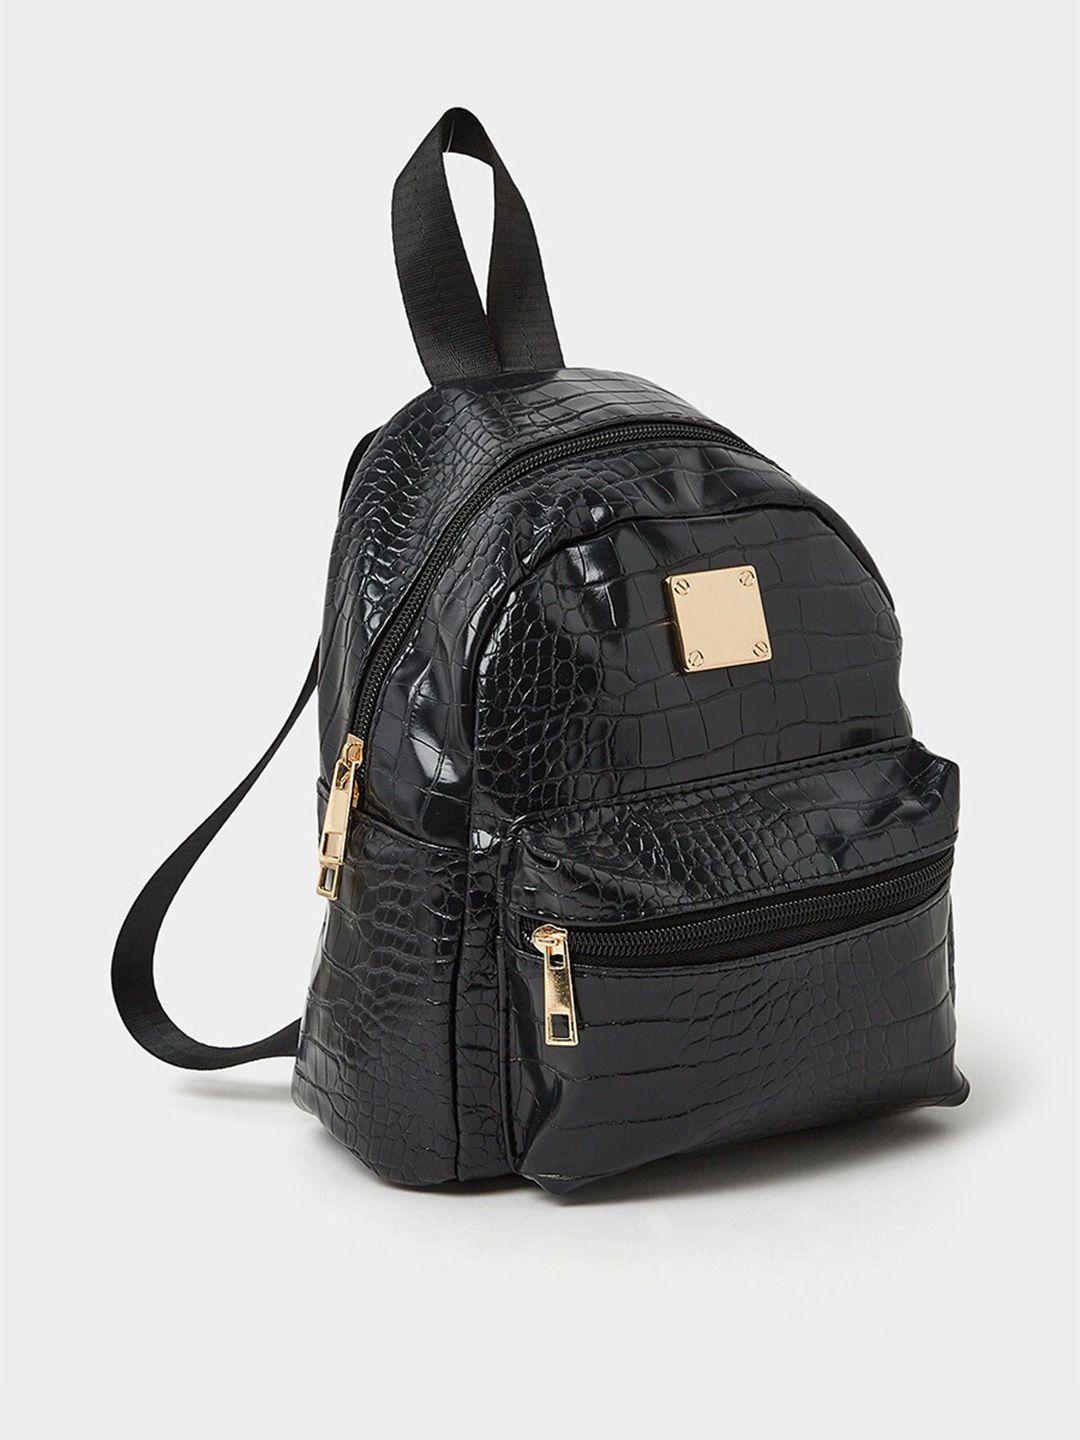 styli women textured backpack